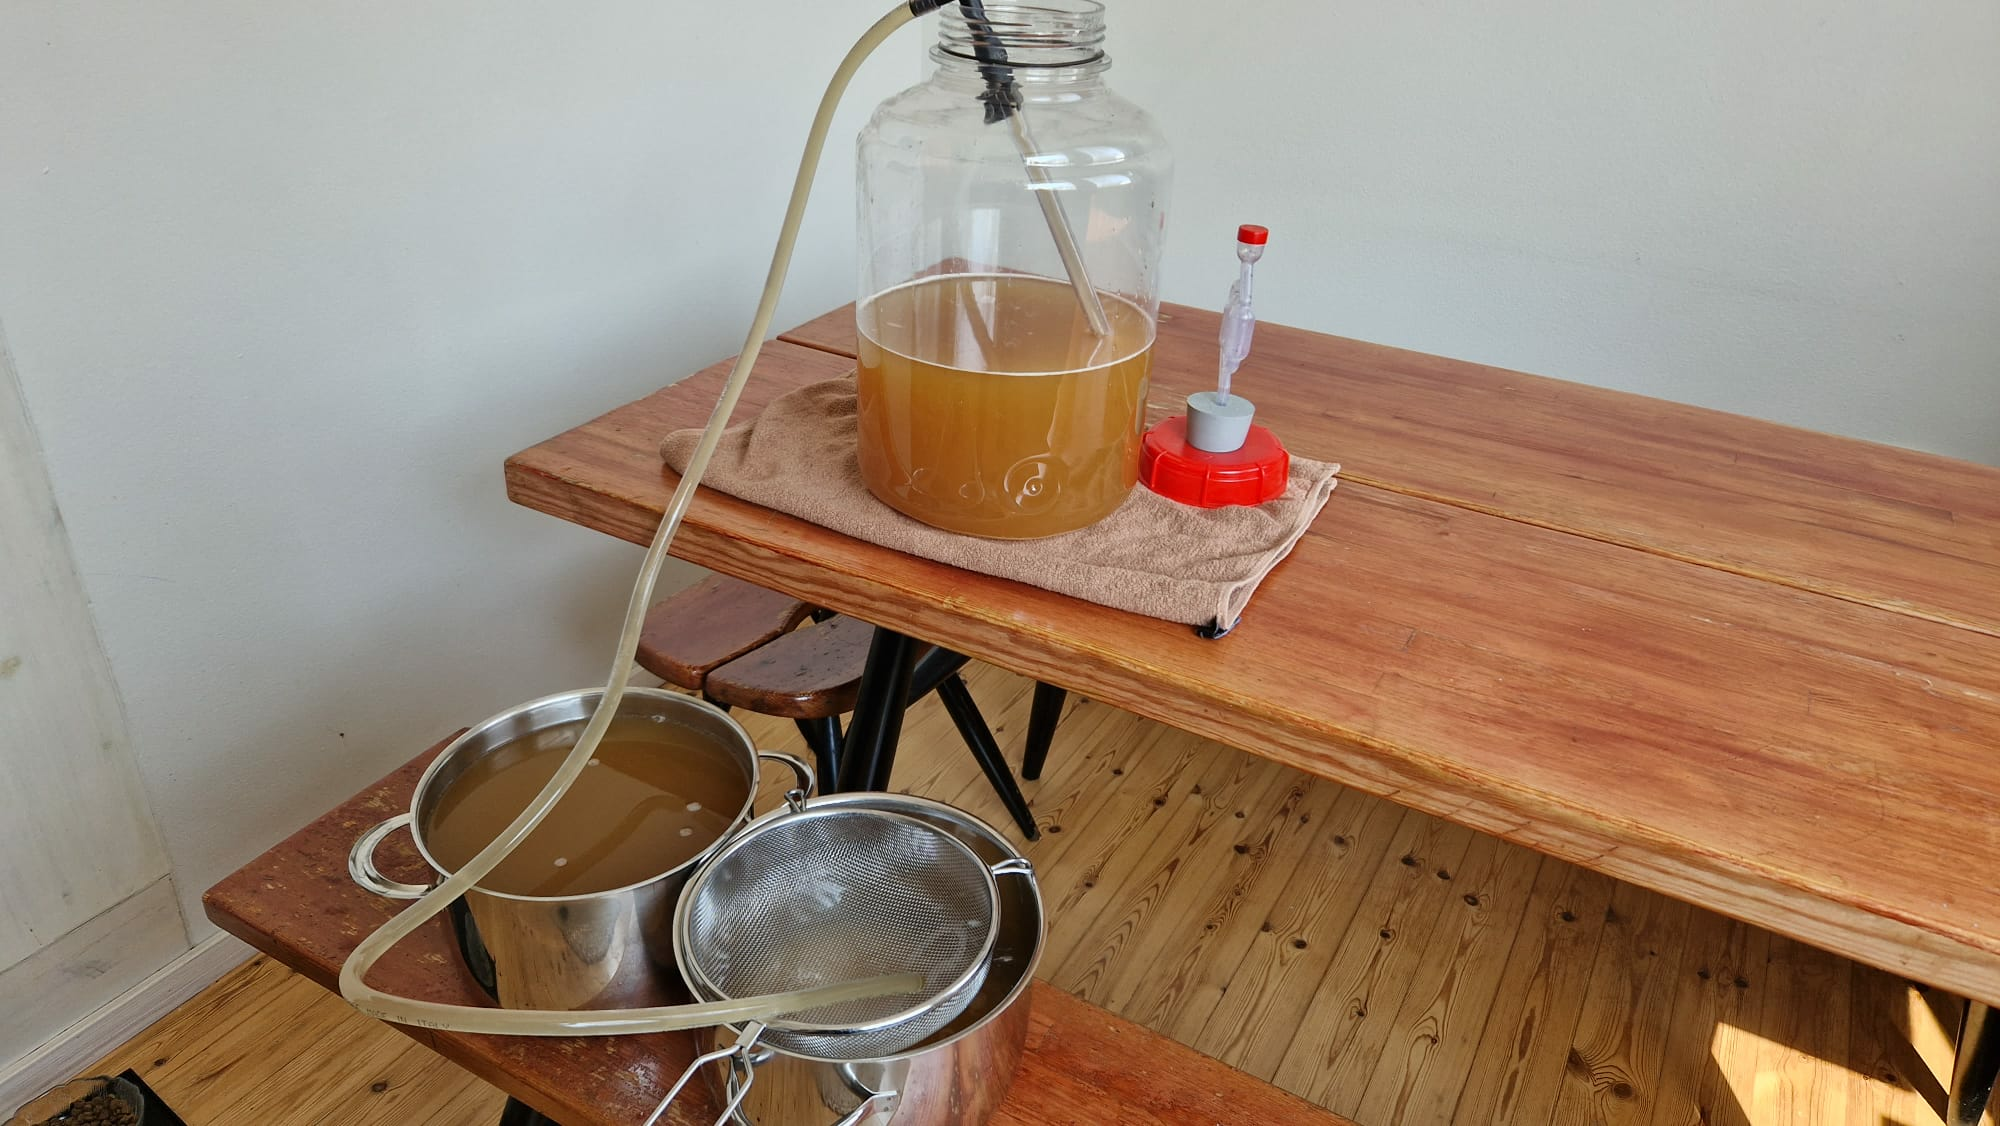 siphoning sima from brewing vat to other containers